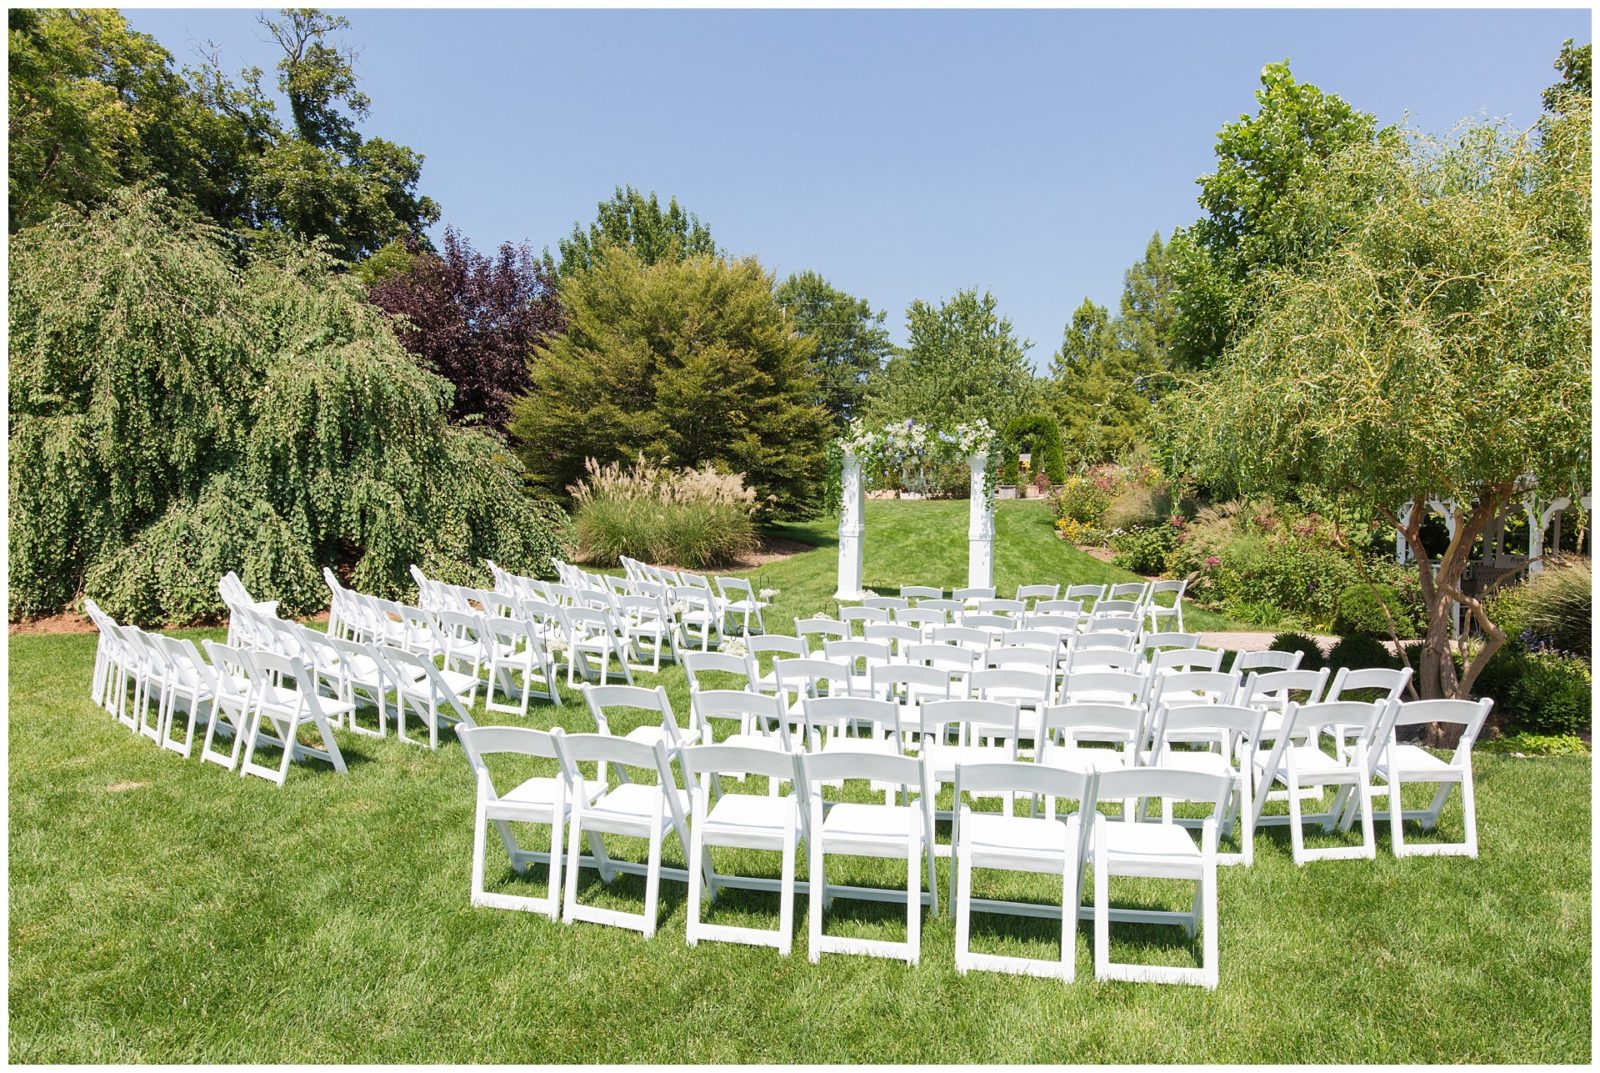 Outdoor wedding ceremony at the Barn at Springhouse Gardens in Nicholasville, KY